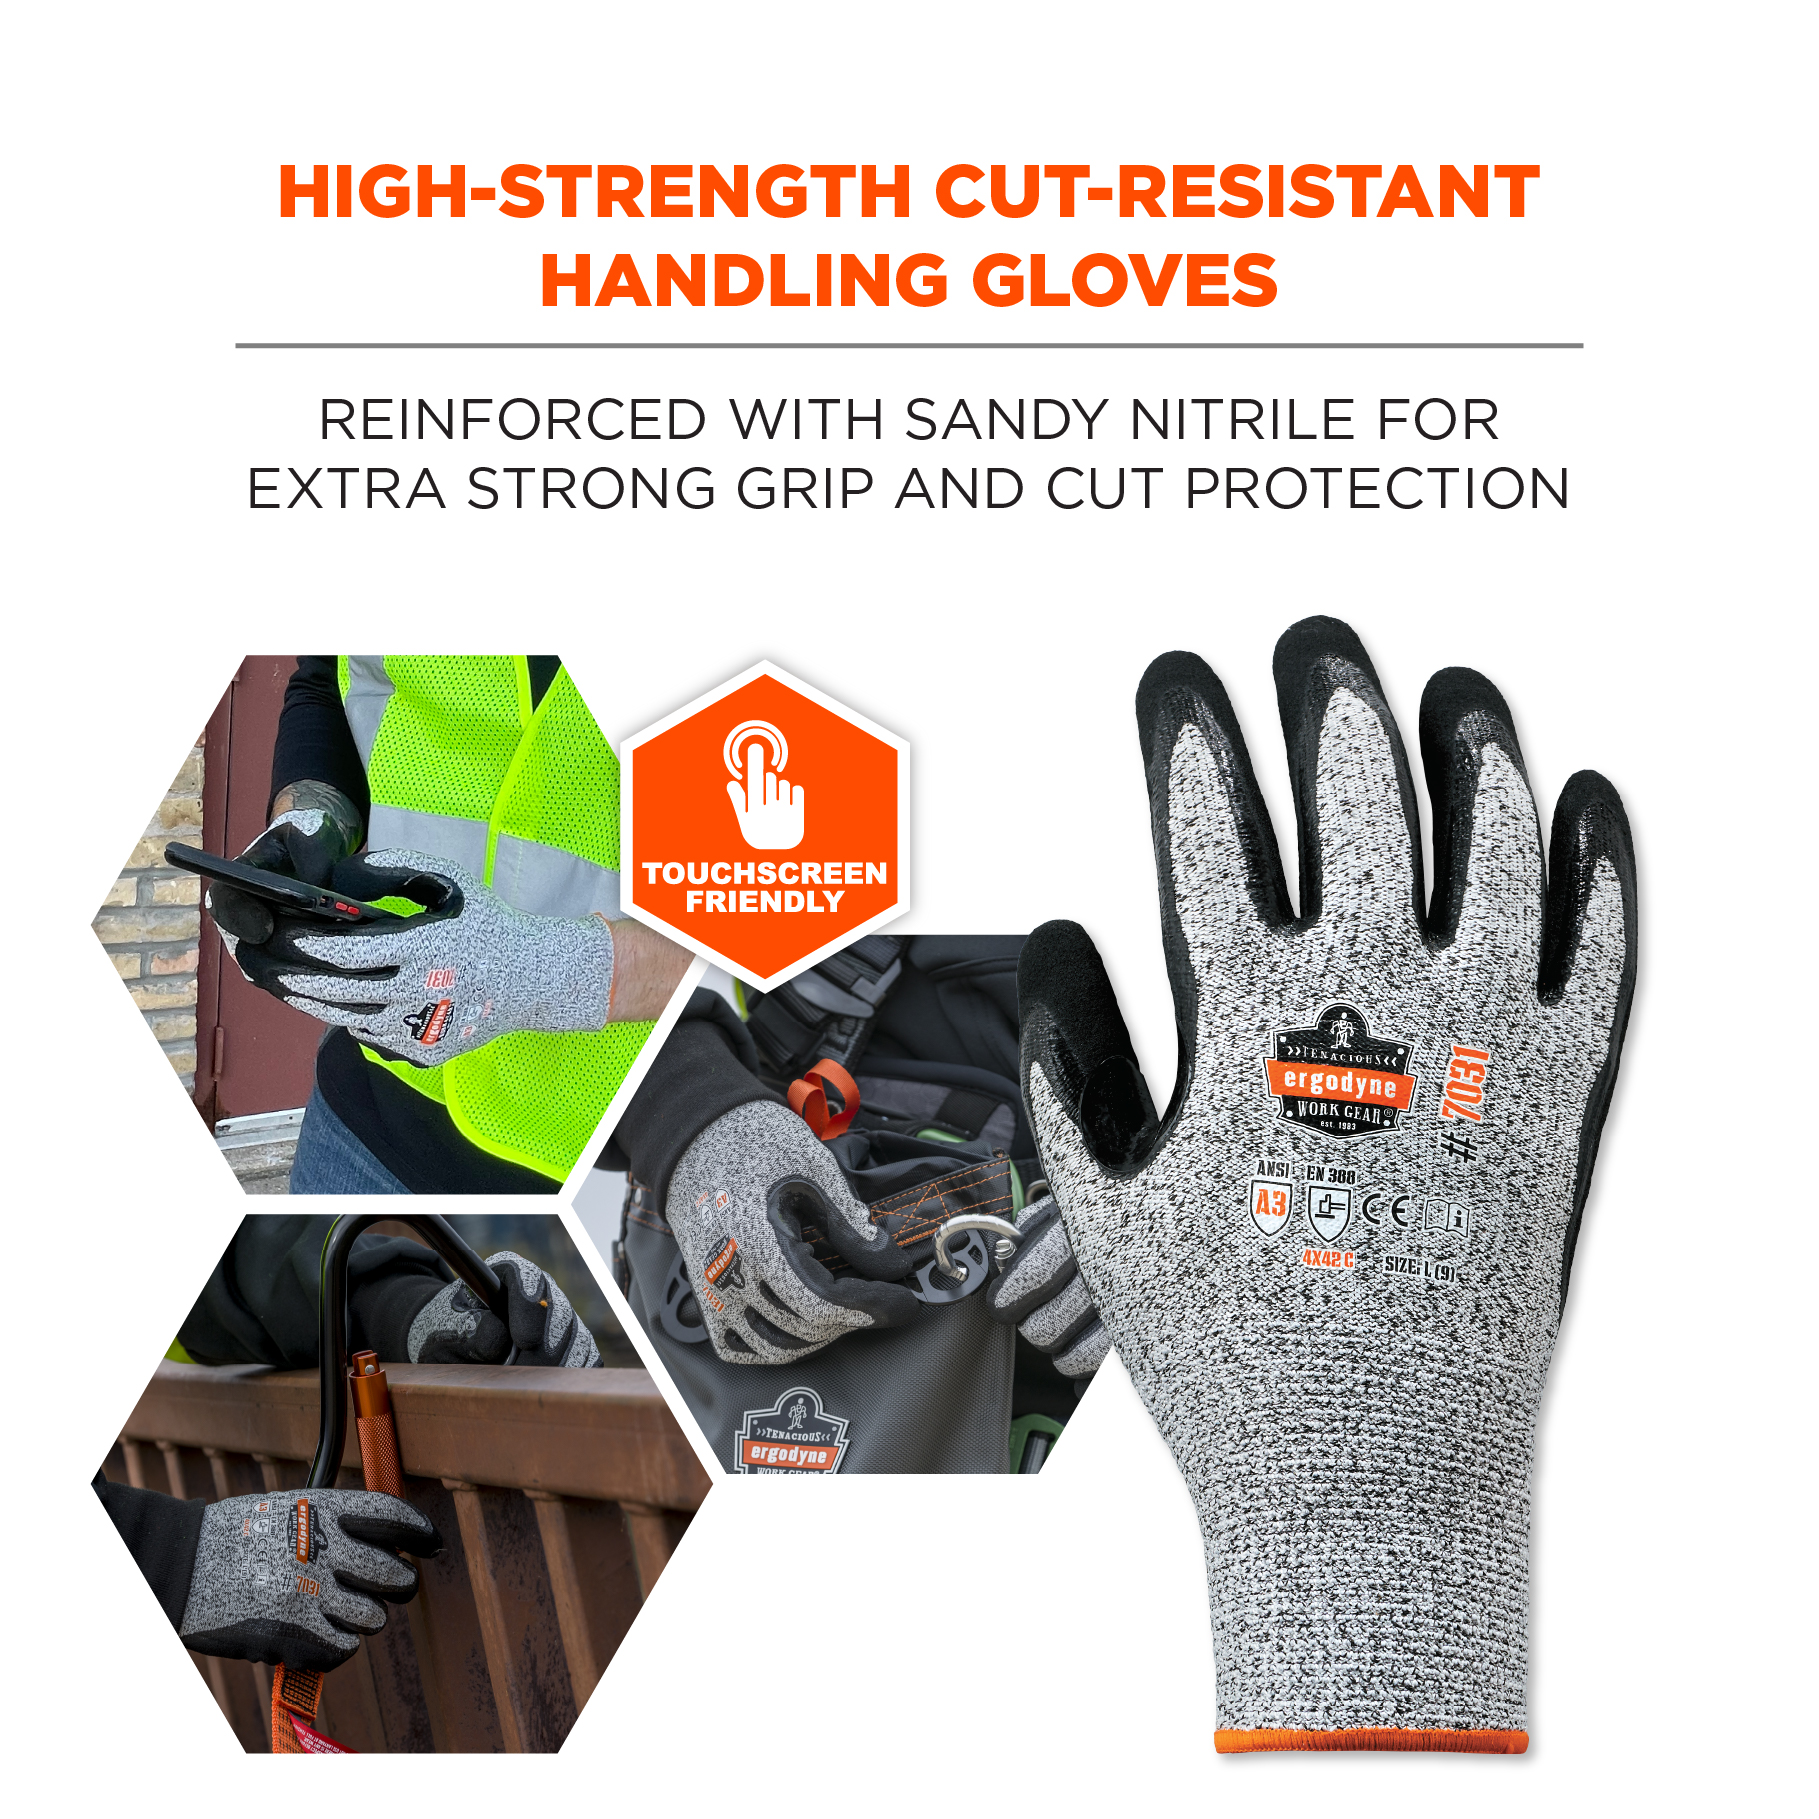 ANSI Level 3 Cut-Resistant Nitrile Coated Work Gloves - Large, 1 Dozen -  Industrial and Personal Safety Products from